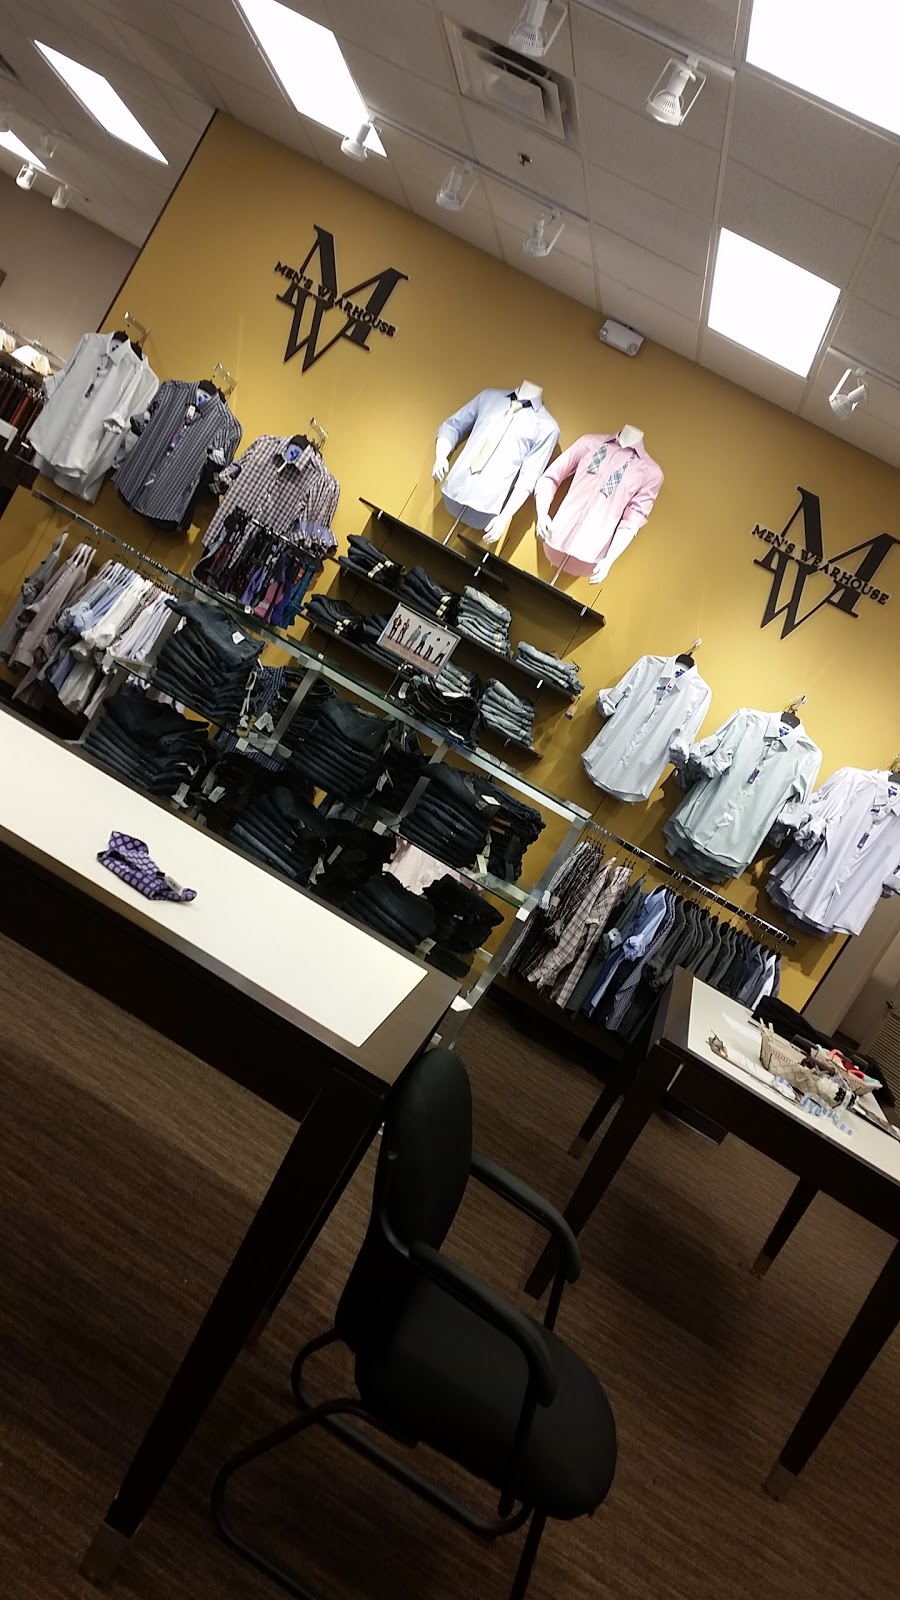 Mens Wearhouse | 2020 South Rd, Poughkeepsie, NY 12601 | Phone: (845) 298-2036